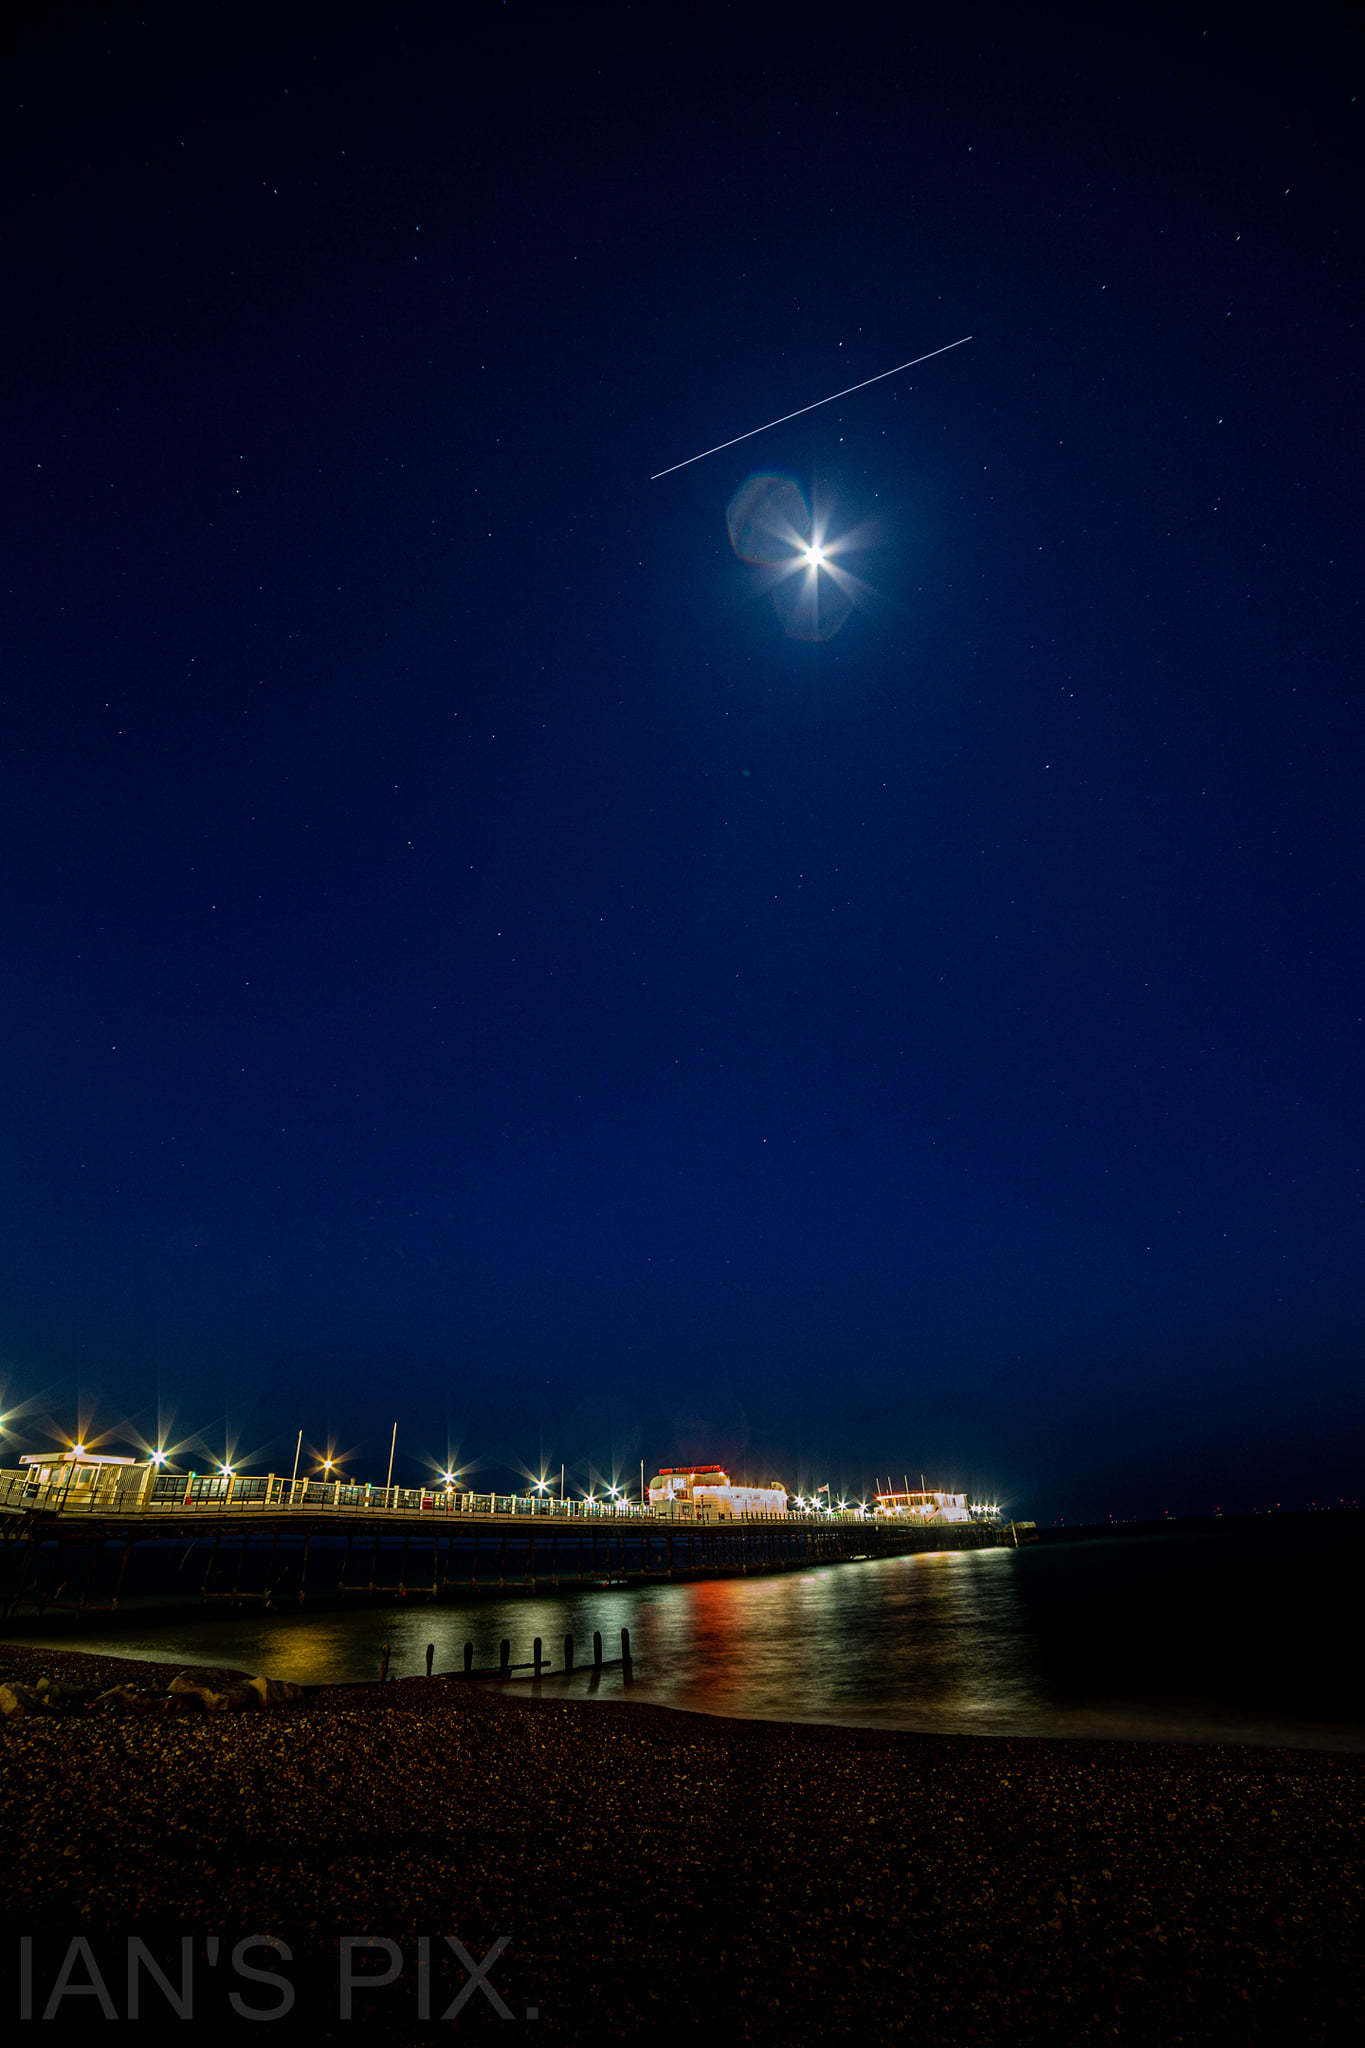 By Ian Mitchell took his picture a few days ago and was thrilled to get the moon, the space station and Worthing Pier all in one shot